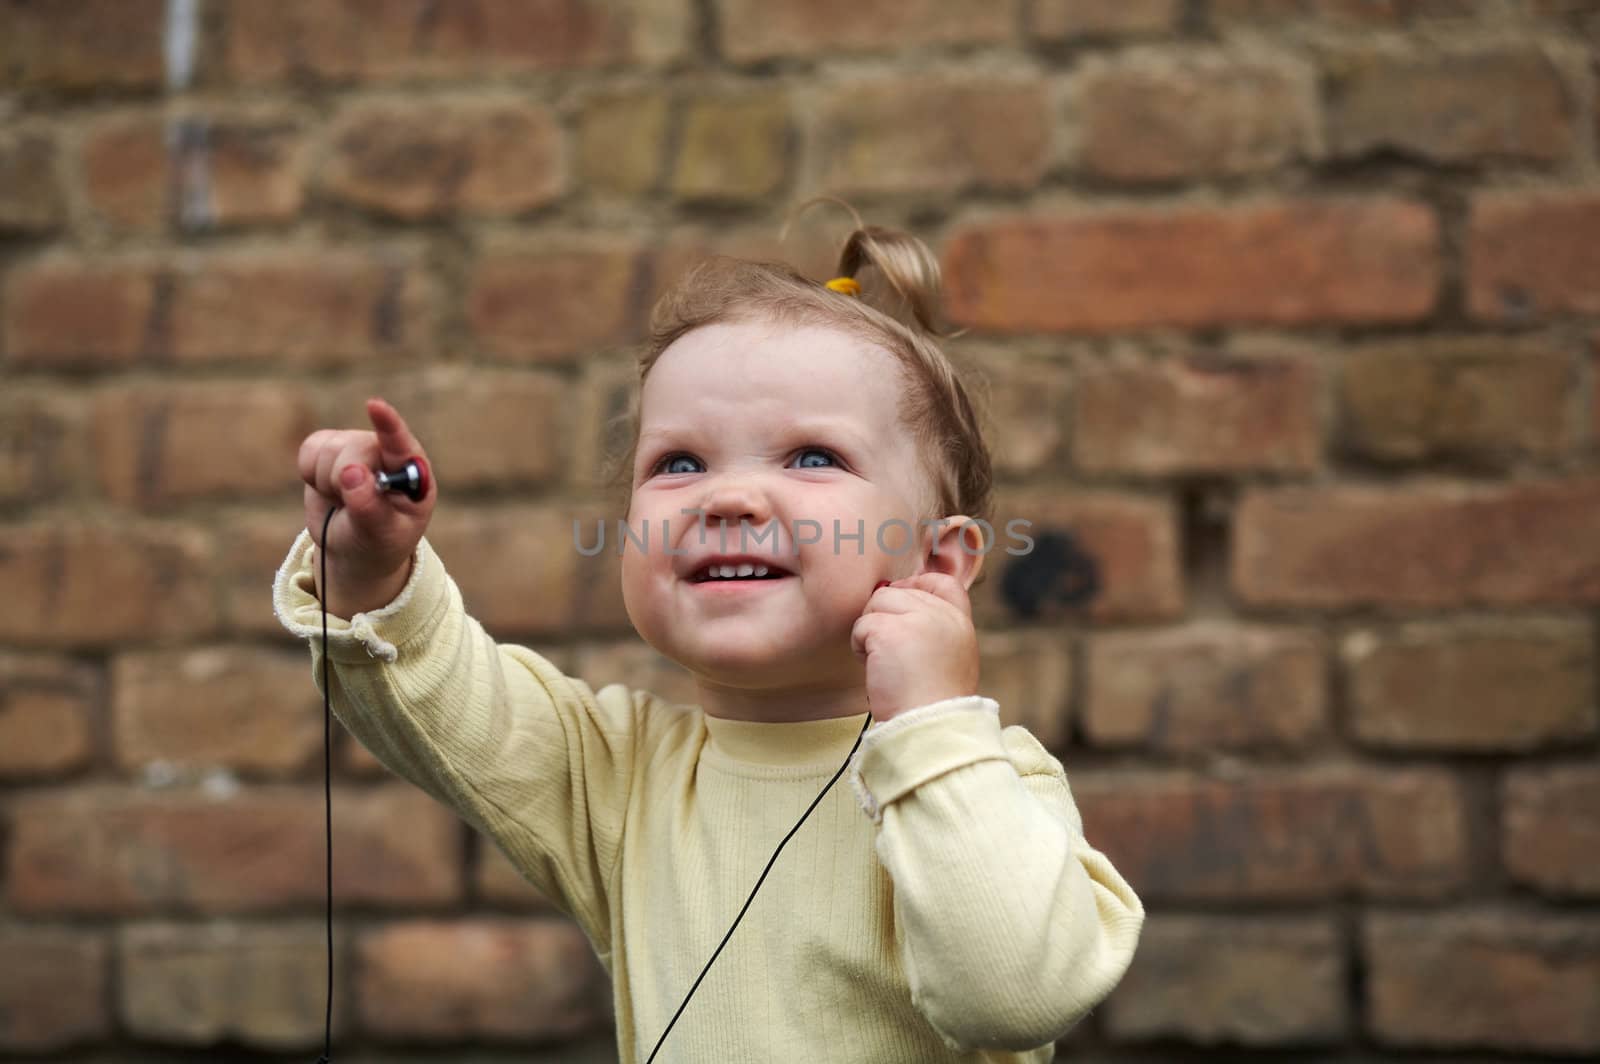 The baby listens to music on a background of a brick wall